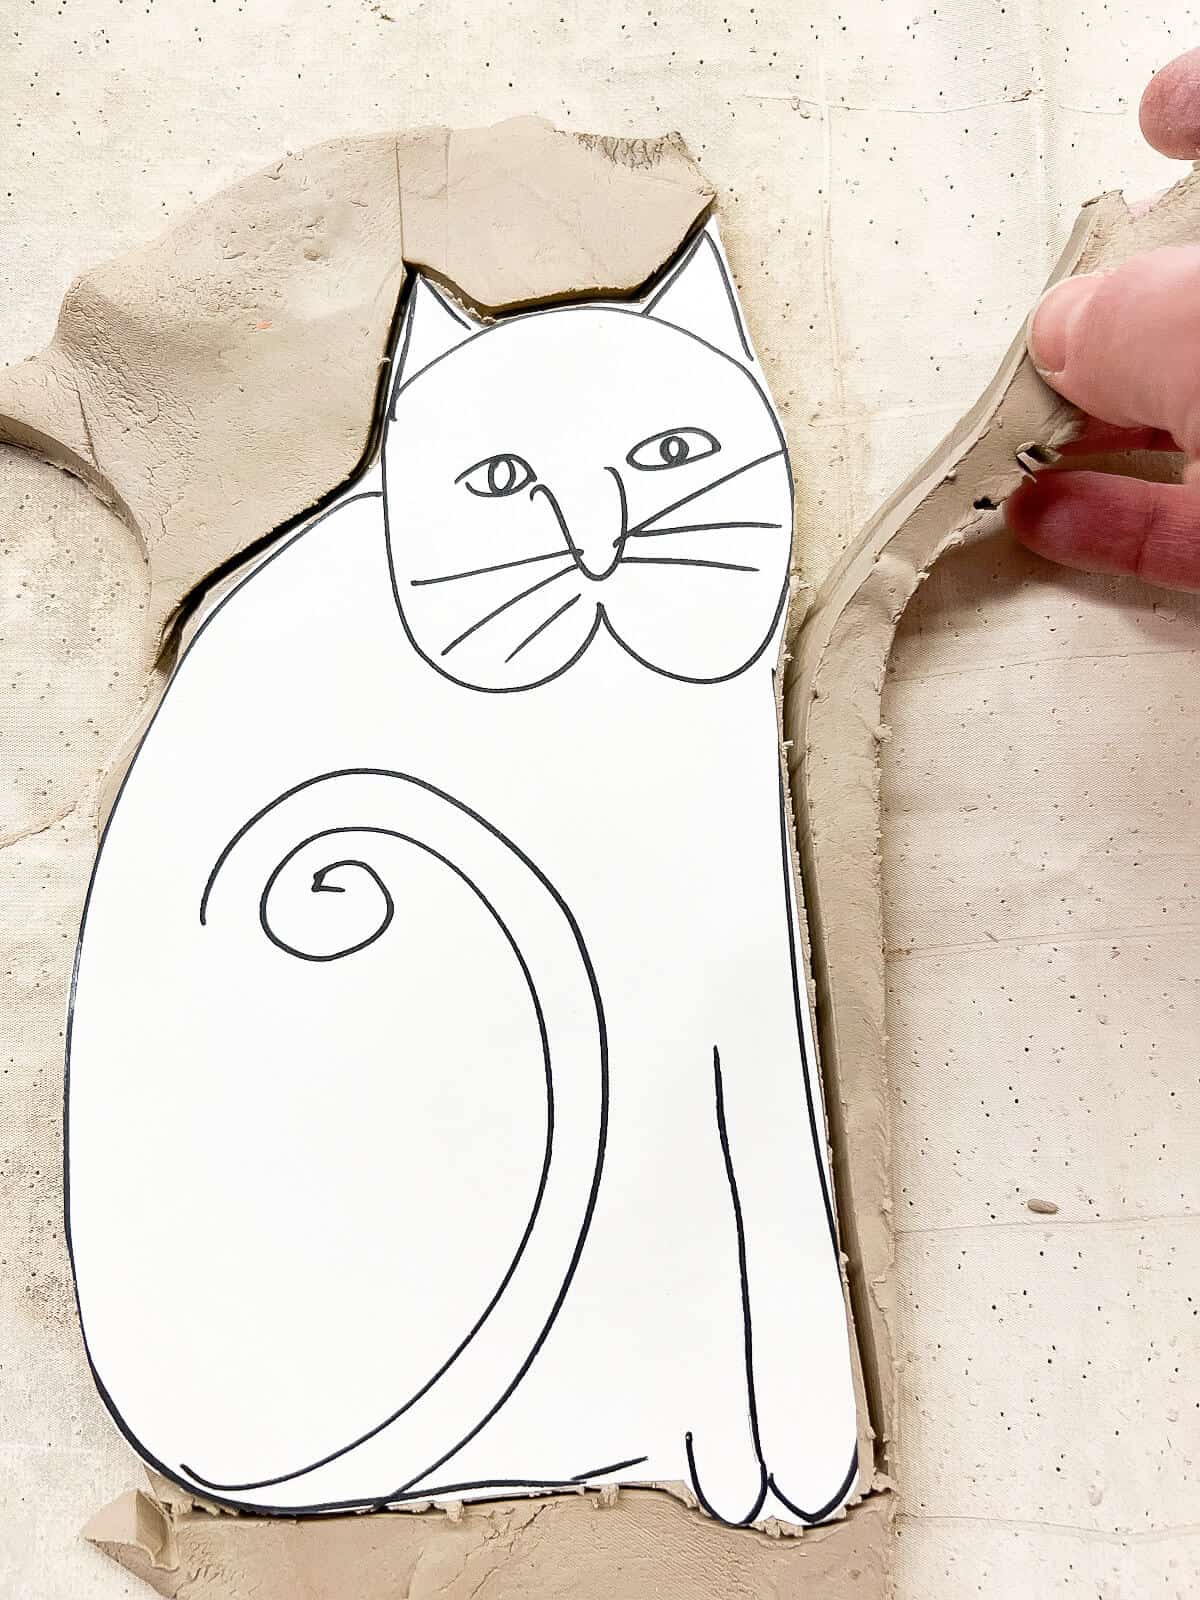 hand pulling extra cut clay off of cut out cat.